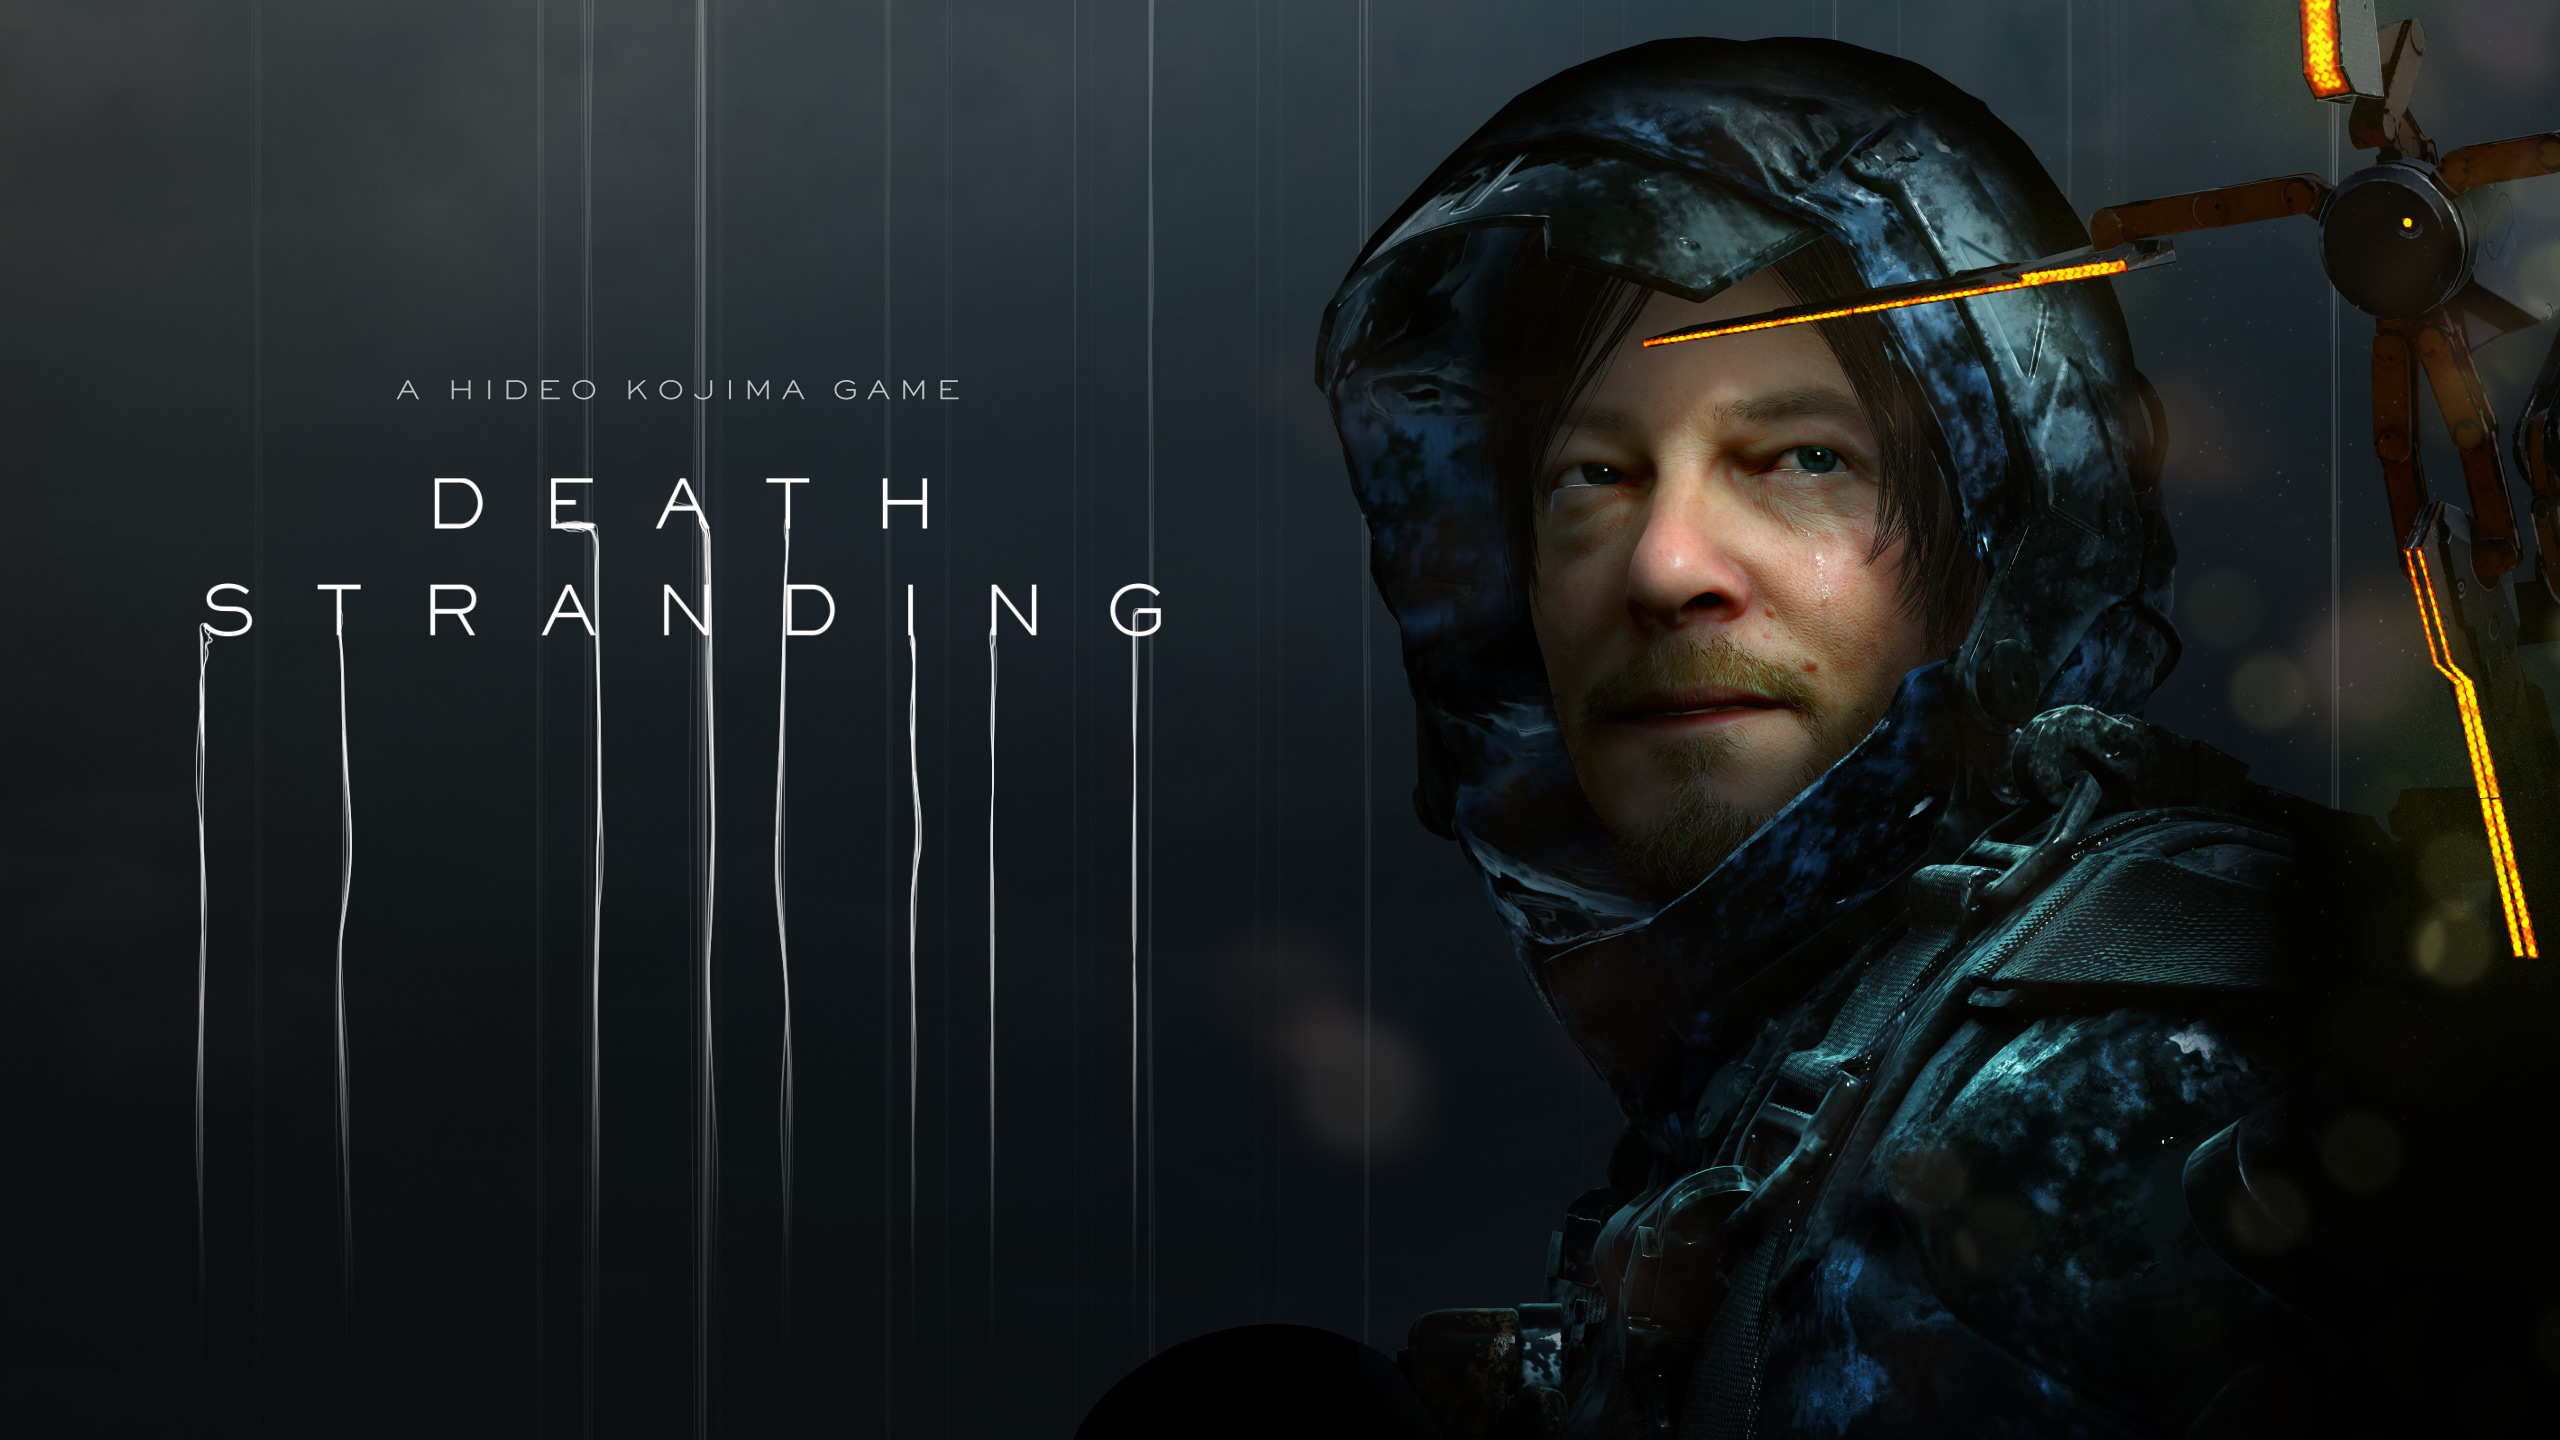 Cut trailer for Death Stranding is coming on September 8!